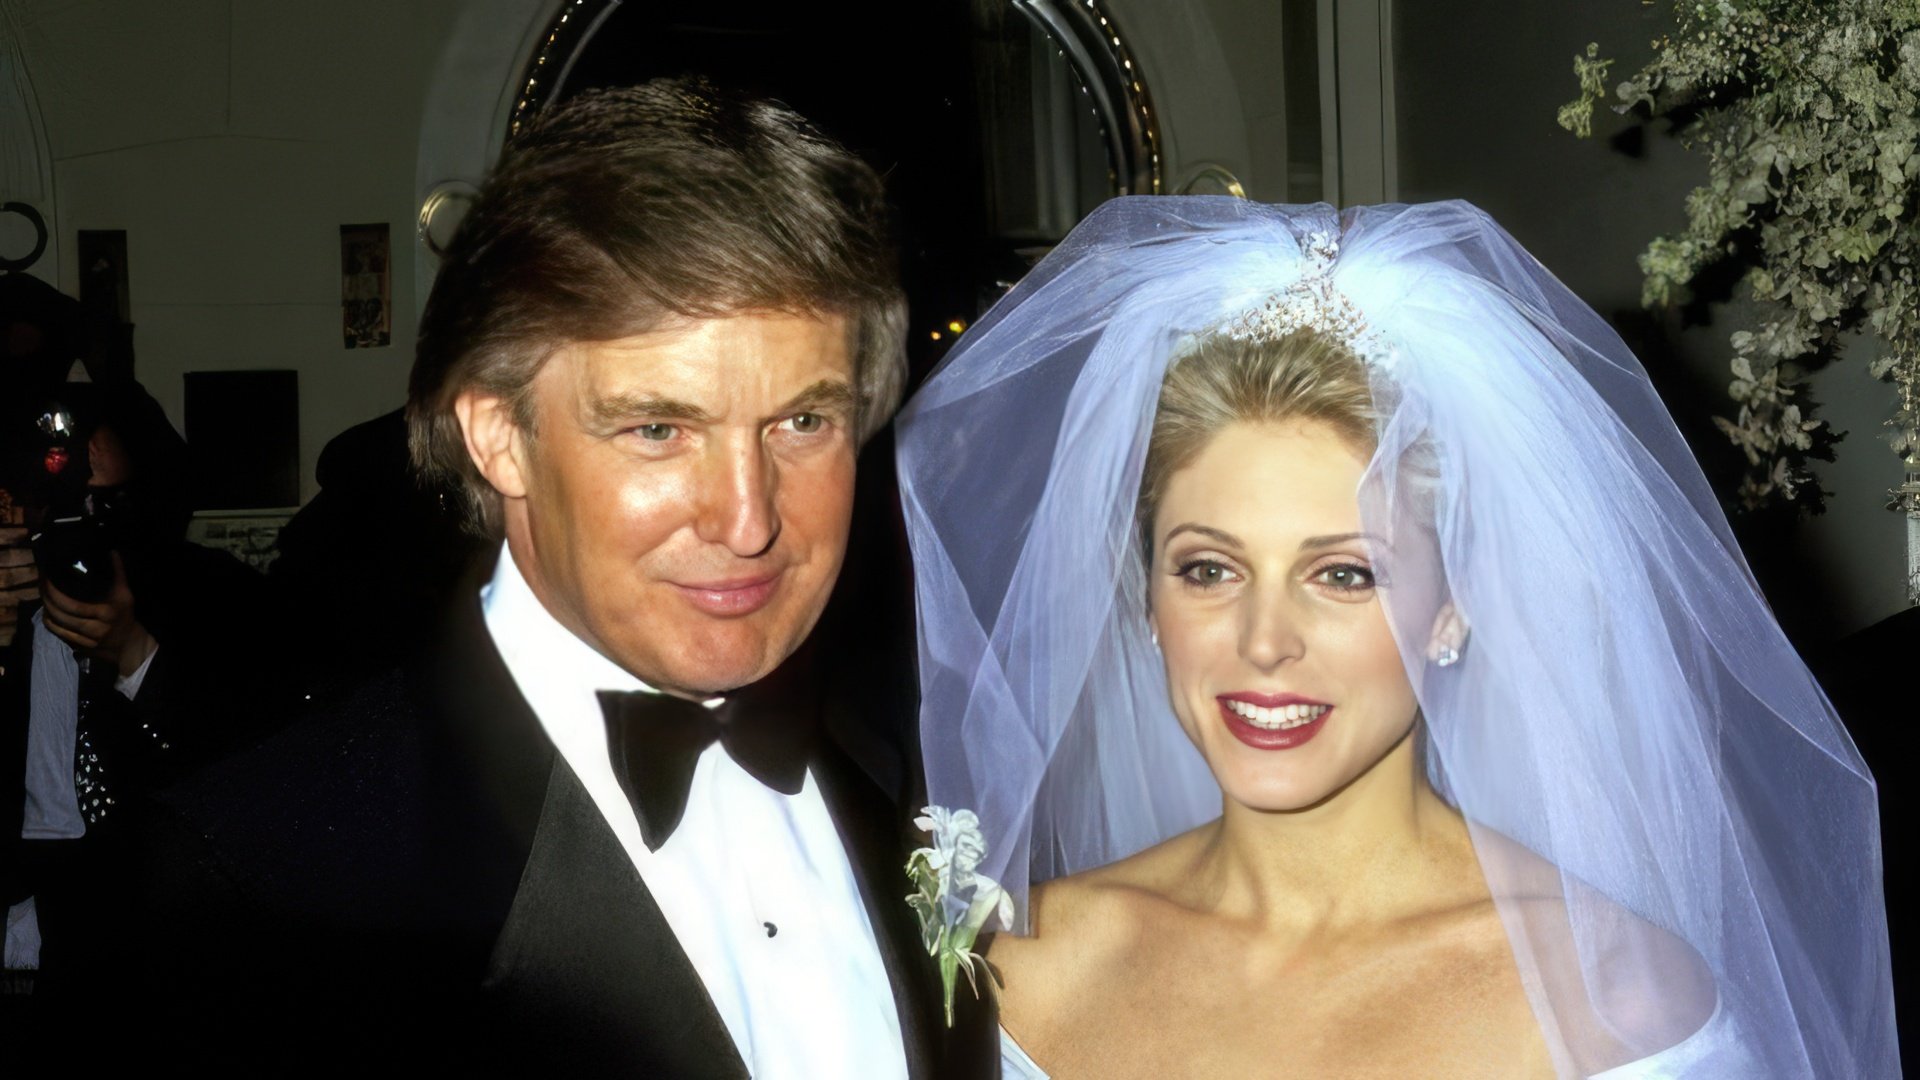 The wedding of Donald Trump and Marla Maples, 1993